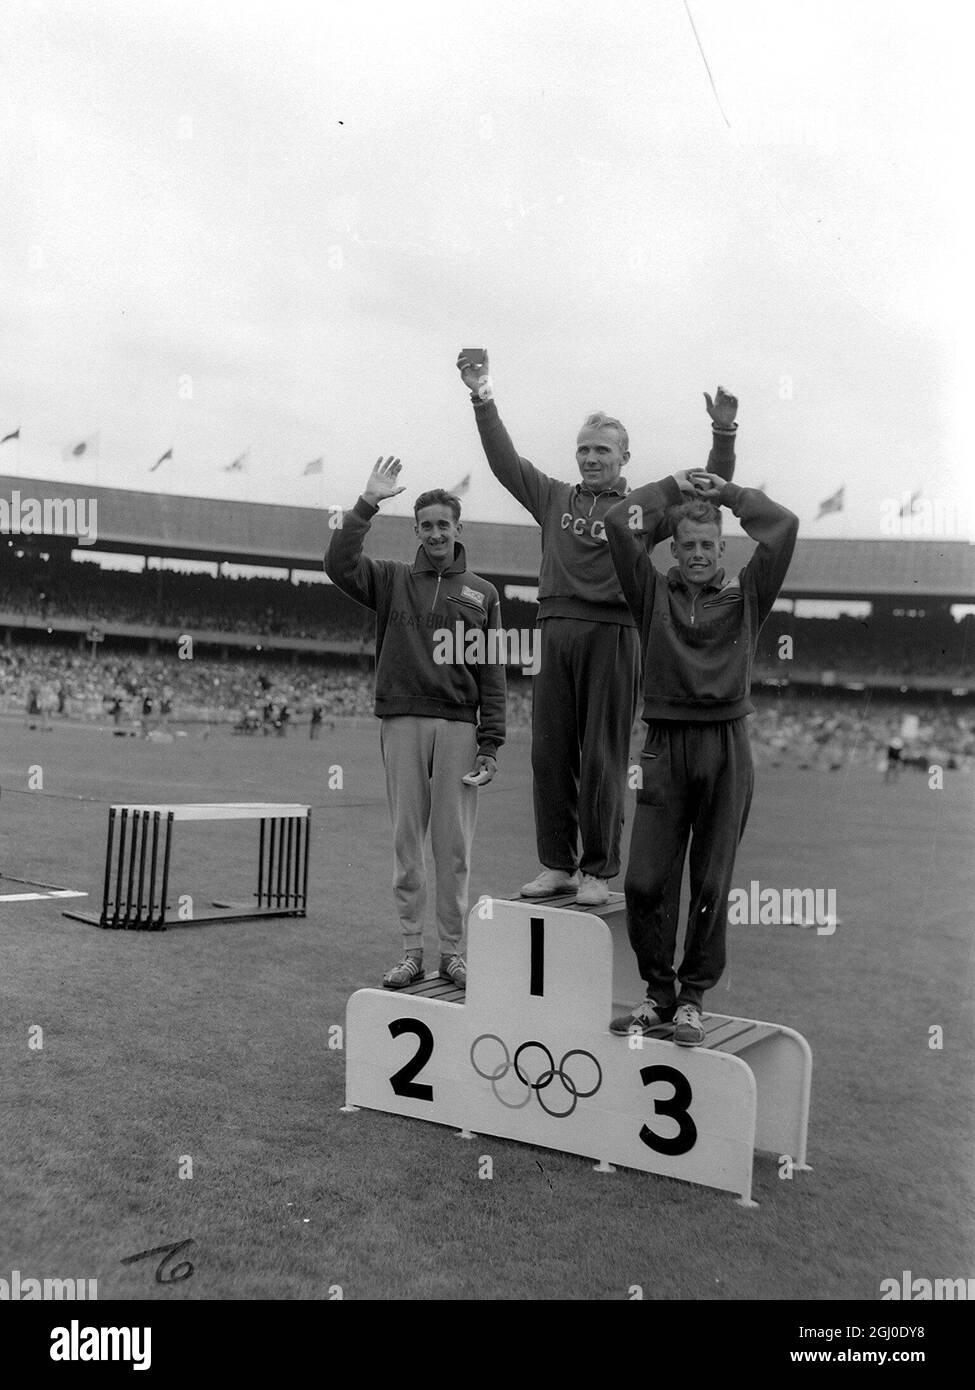 Melbourne Olympic Games 1956 Men's 5000m final Russia's Vladimir Kuts won the Gold medal in a time of 13 minutes 39.6 seconds with Britain's Gordon Pirie silver and Derek Ibbotson of Great Britain bronze. 28th November 1956 Stock Photo